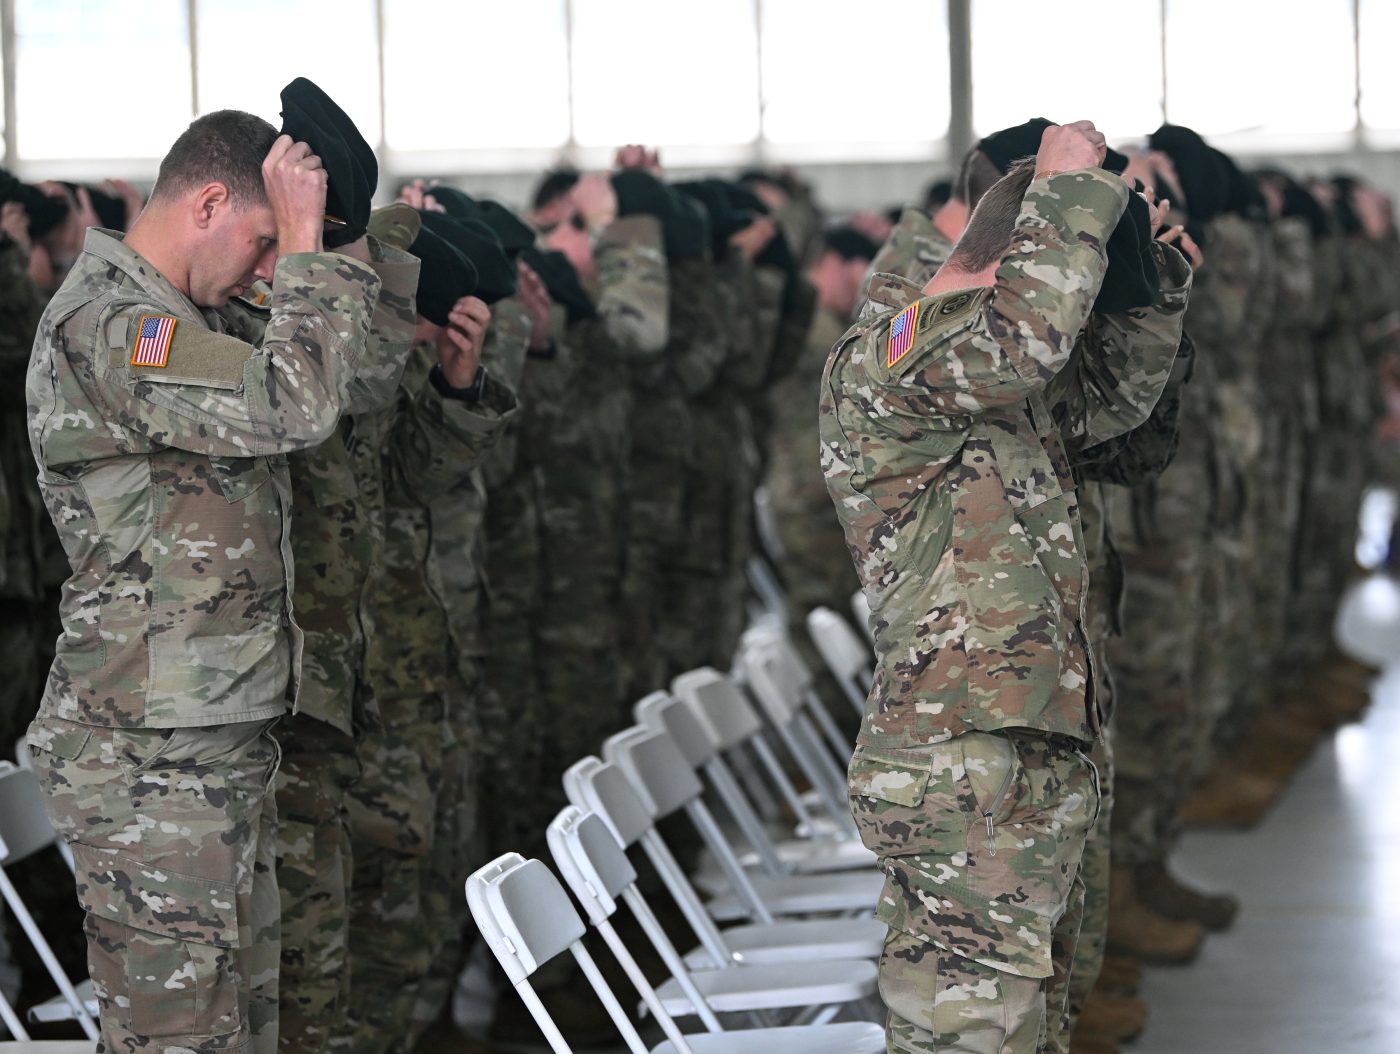 Photo: Soldiers assigned to the U.S. Army John F. Kennedy Special Warfare Center and School don their green berets for the first time during a Regimental First Formation at Fort Liberty, North Carolina October 12, 2023. The ceremony marked the completion of the Special Forces Qualification Course where Soldiers earned the honor of wearing the green beret, the official headgear of Special Forces. Credit: U.S. Army photo by K. Kassens via dvids